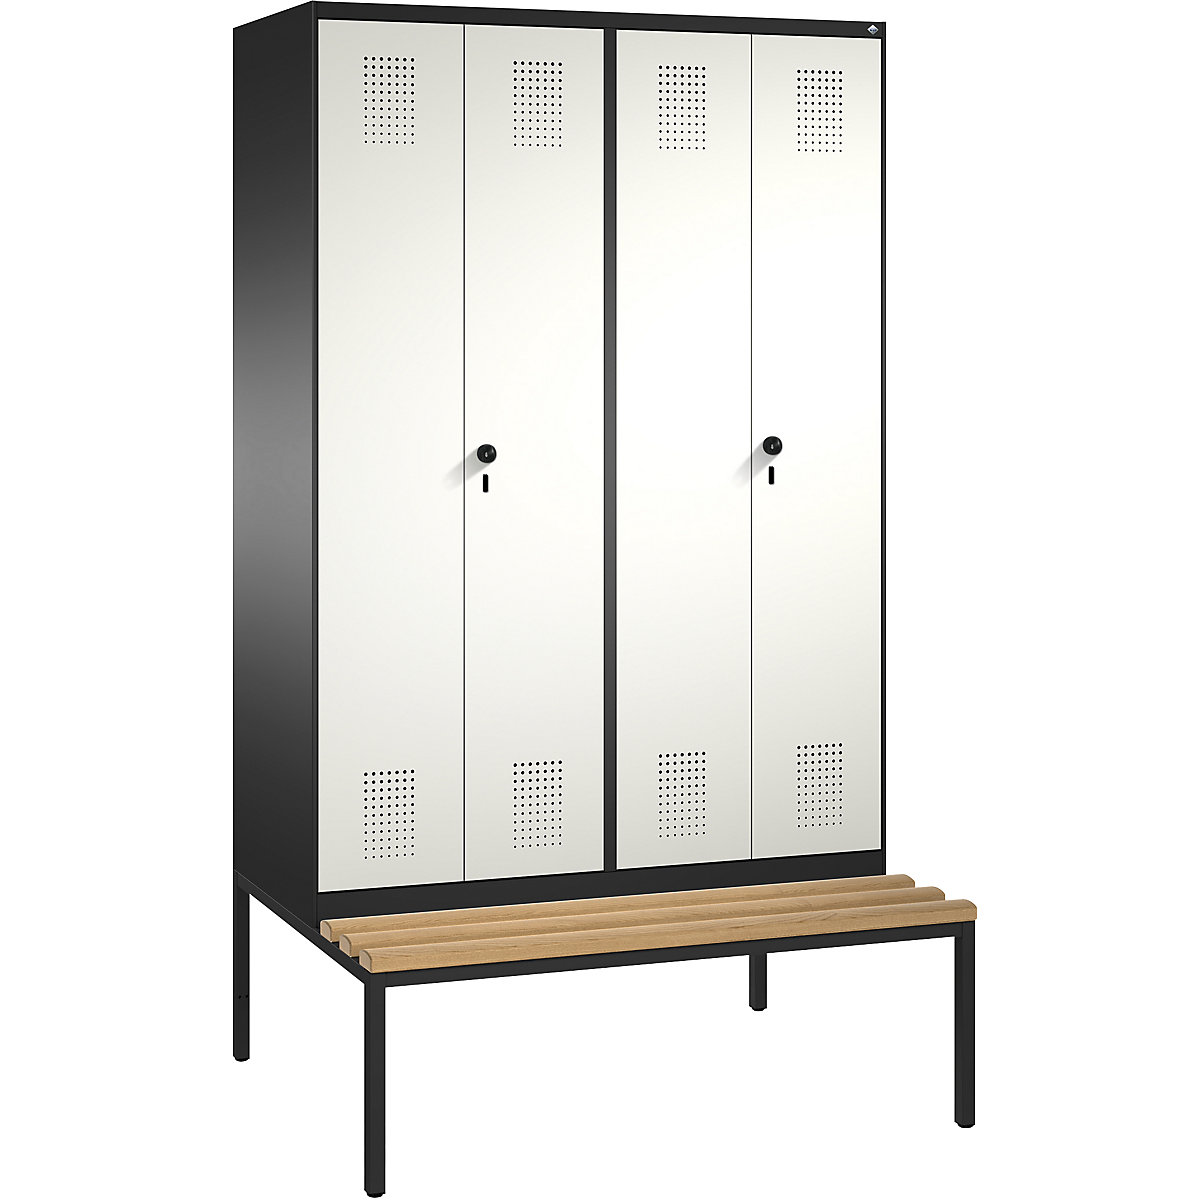 EVOLO cloakroom locker, doors close in the middle, with bench - C+P